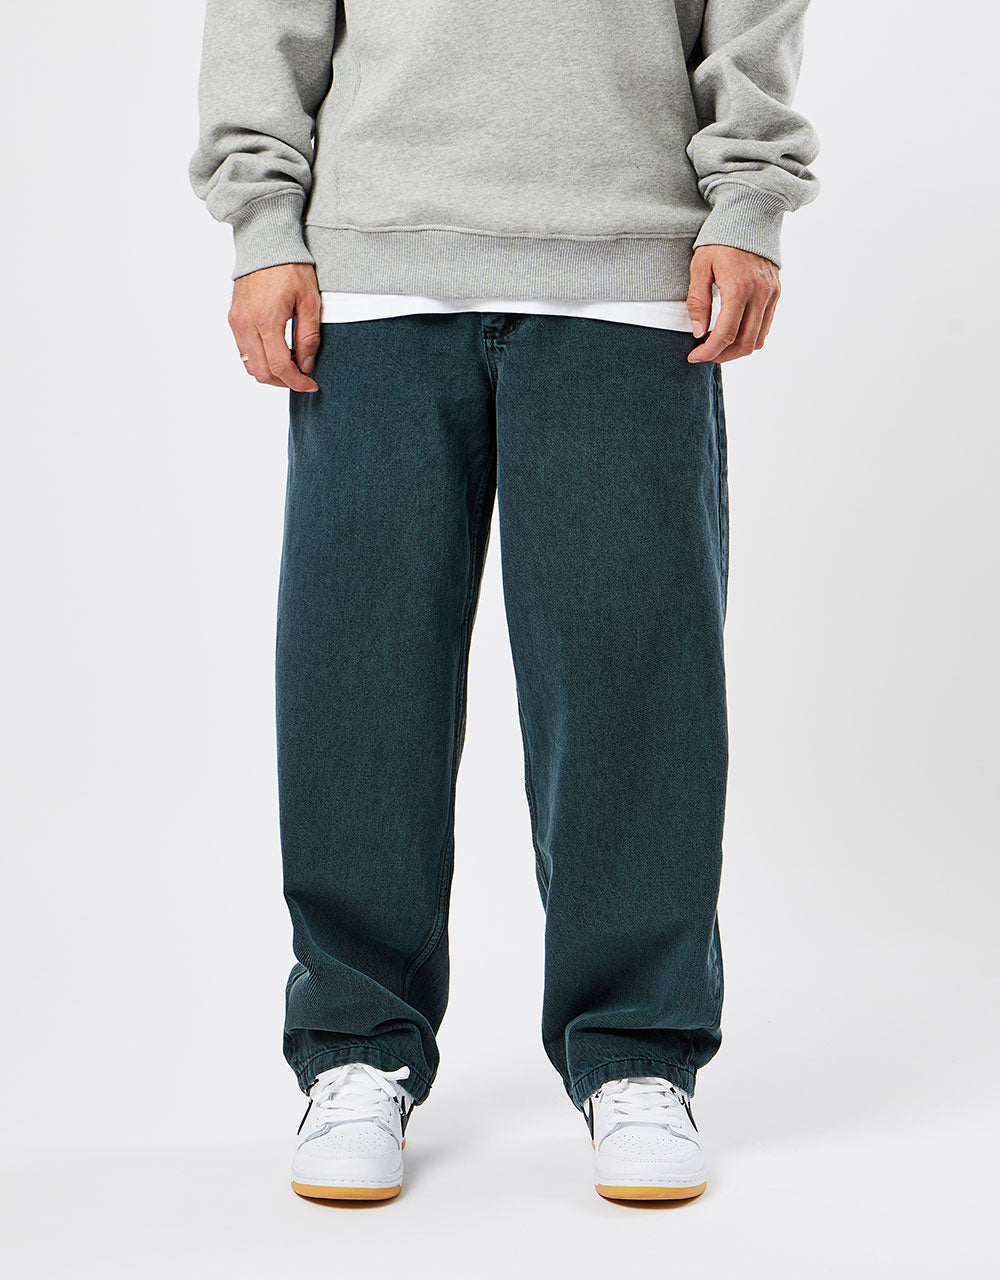 Route One Super Baggy Denim Jeans - Shaded Spruce